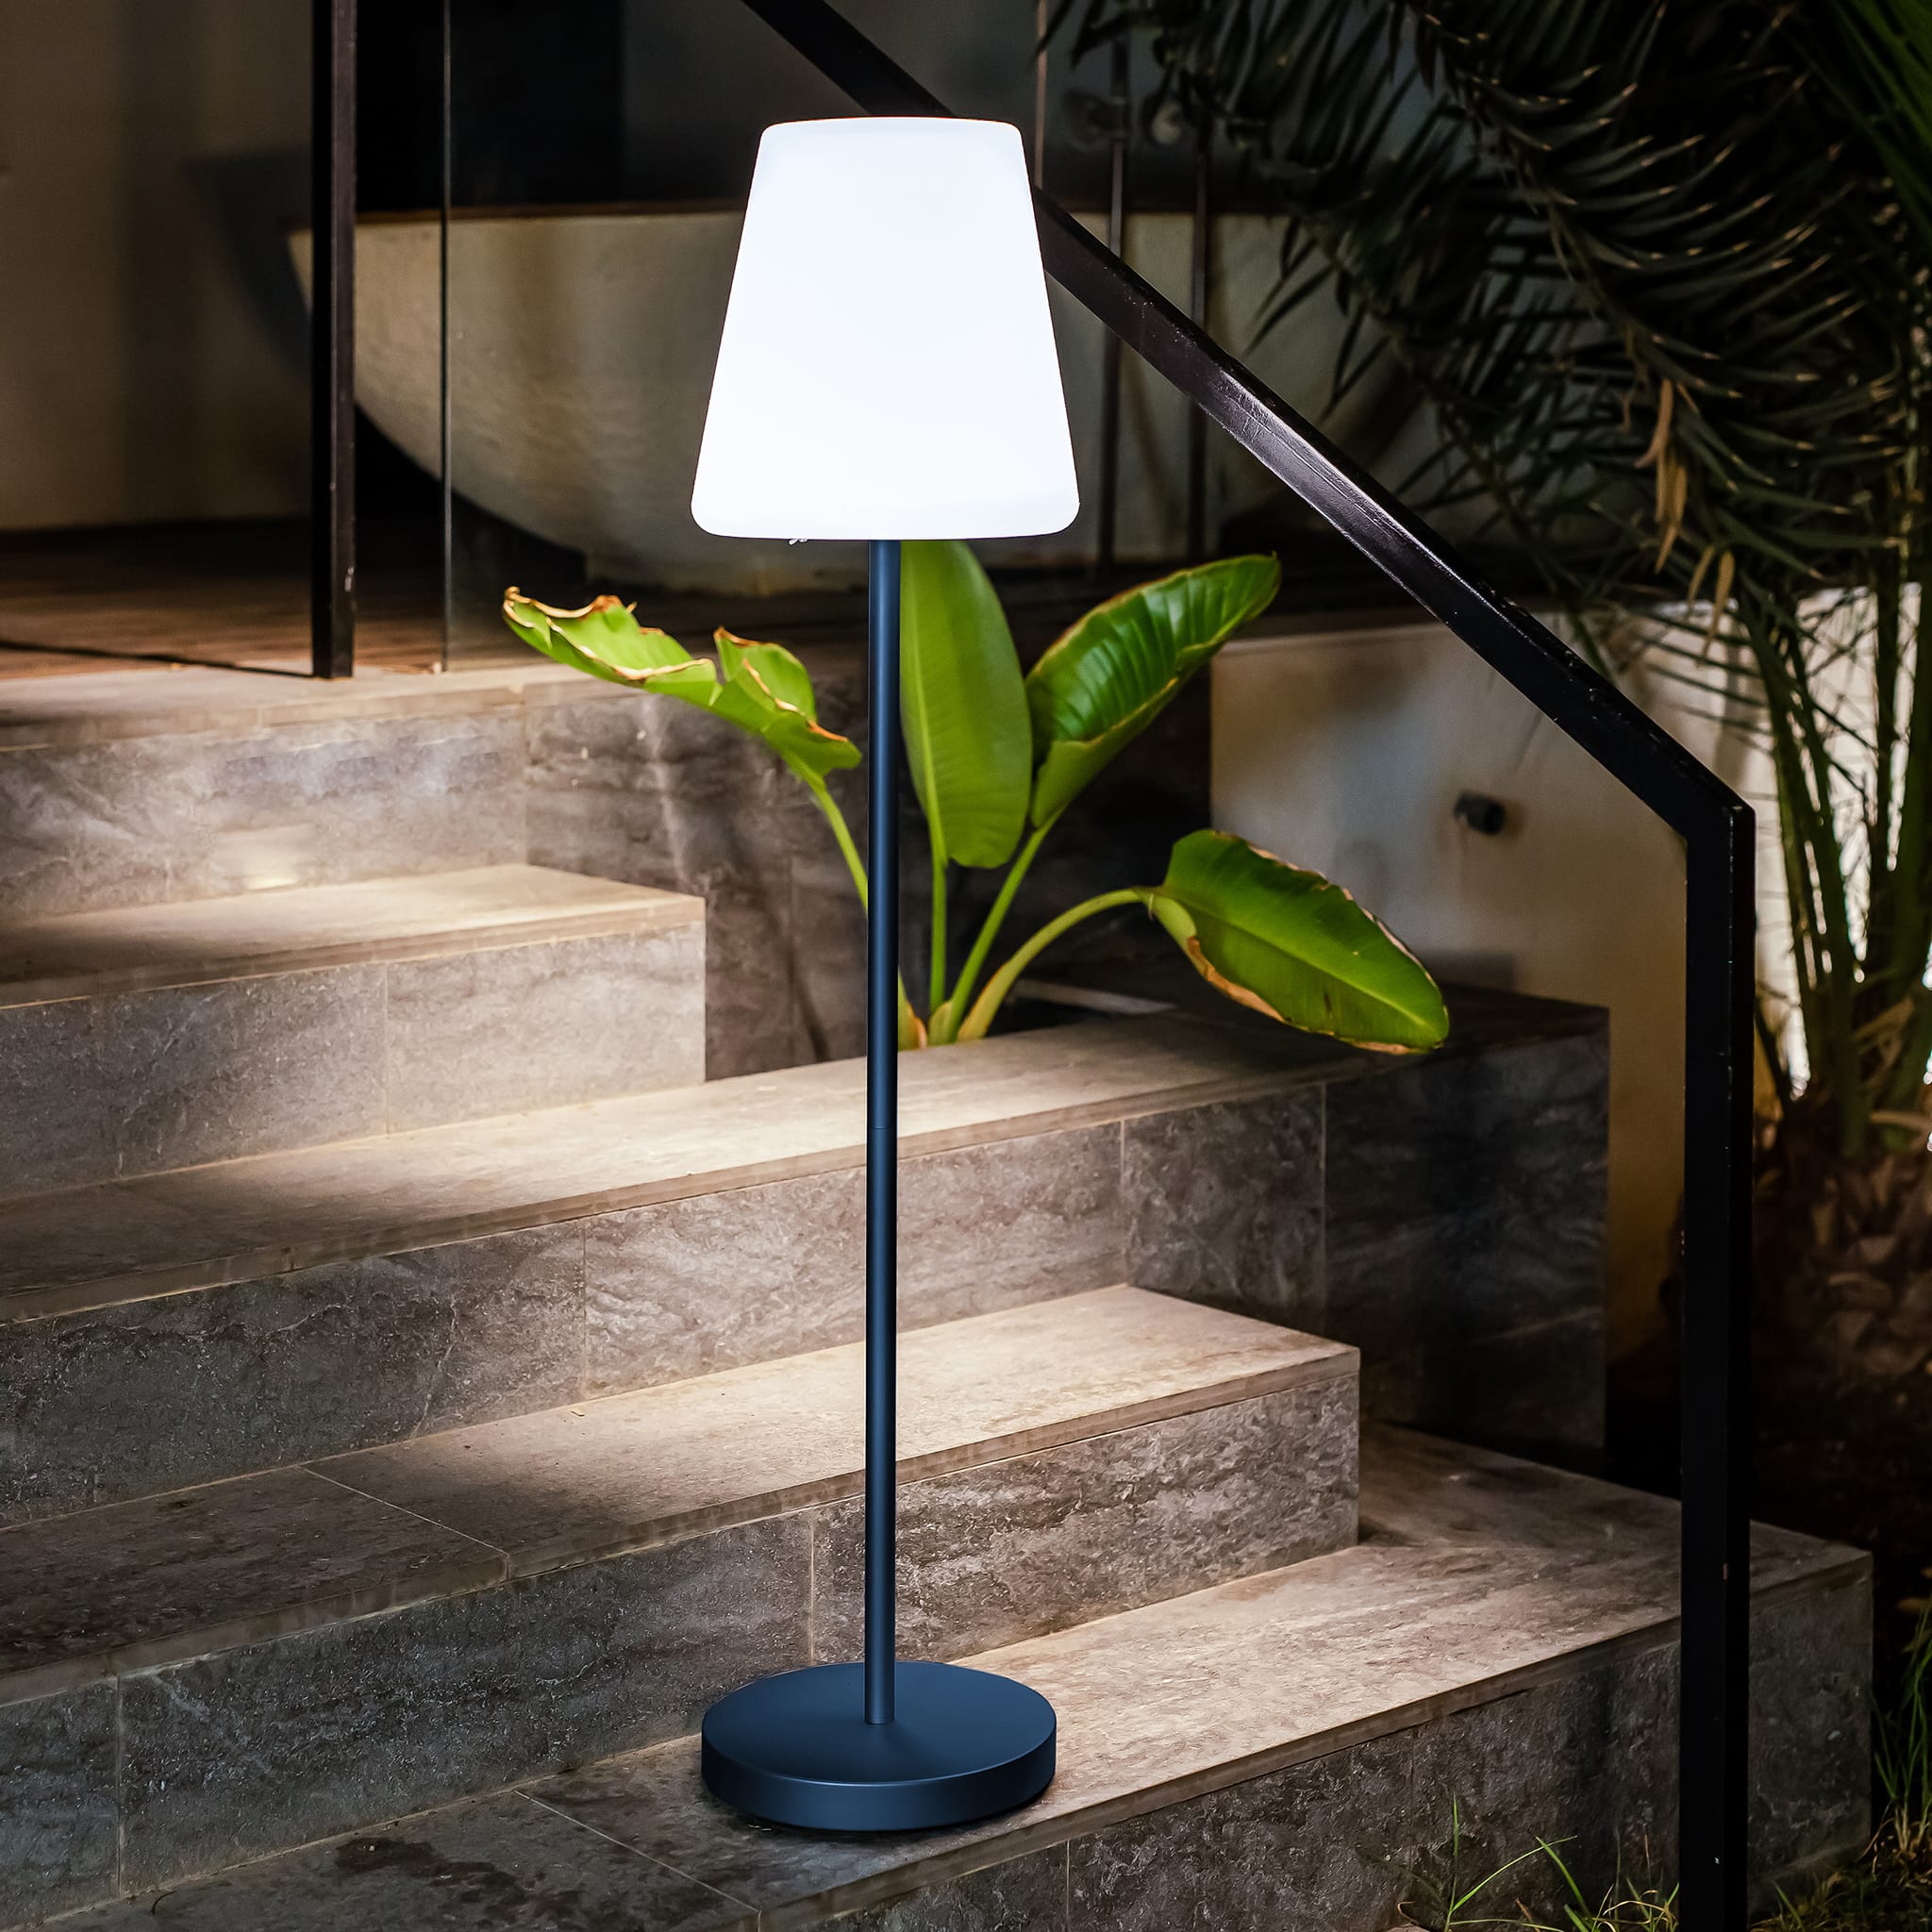 Choose Lola Slim 120 for a unique lighting experience: an elegant, durable LED lamp with a range of color options for any setting.